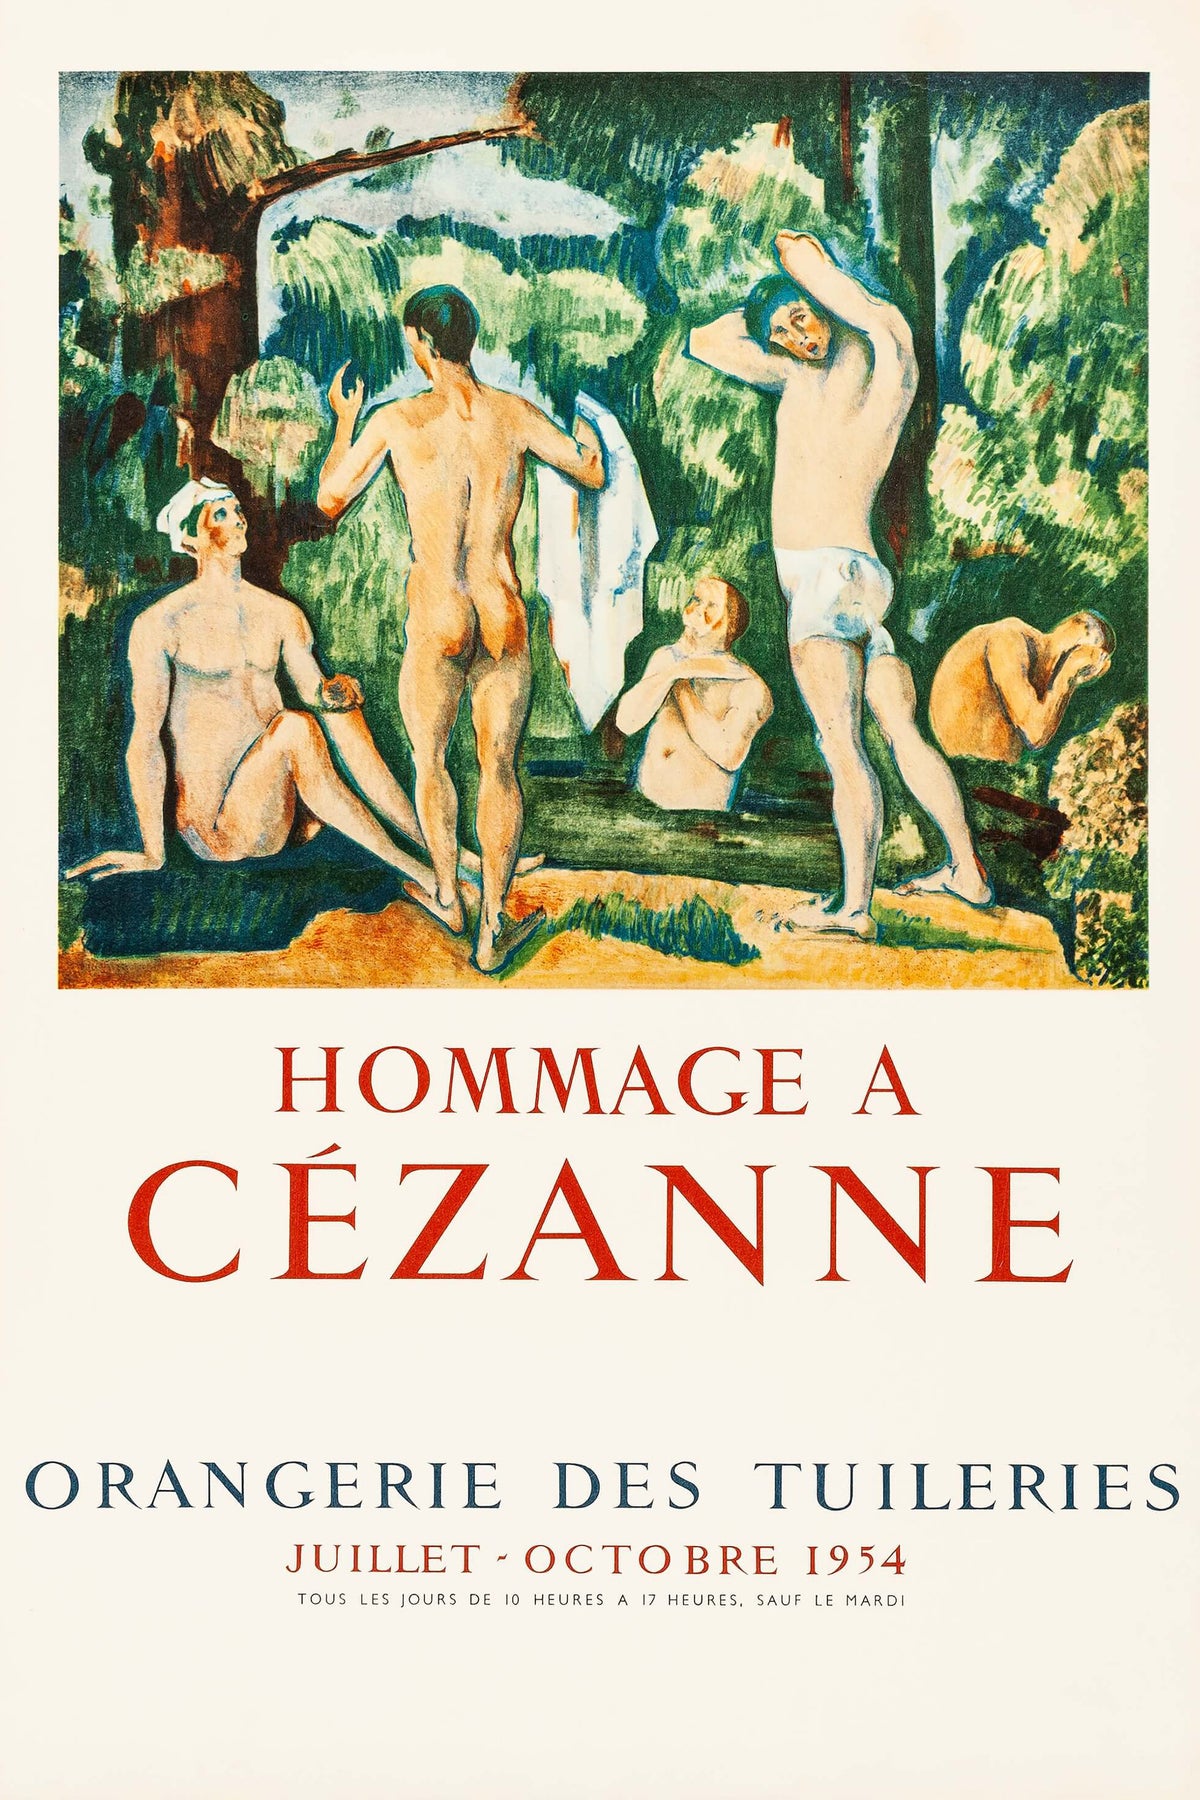 Homage to Cézanne (1954)